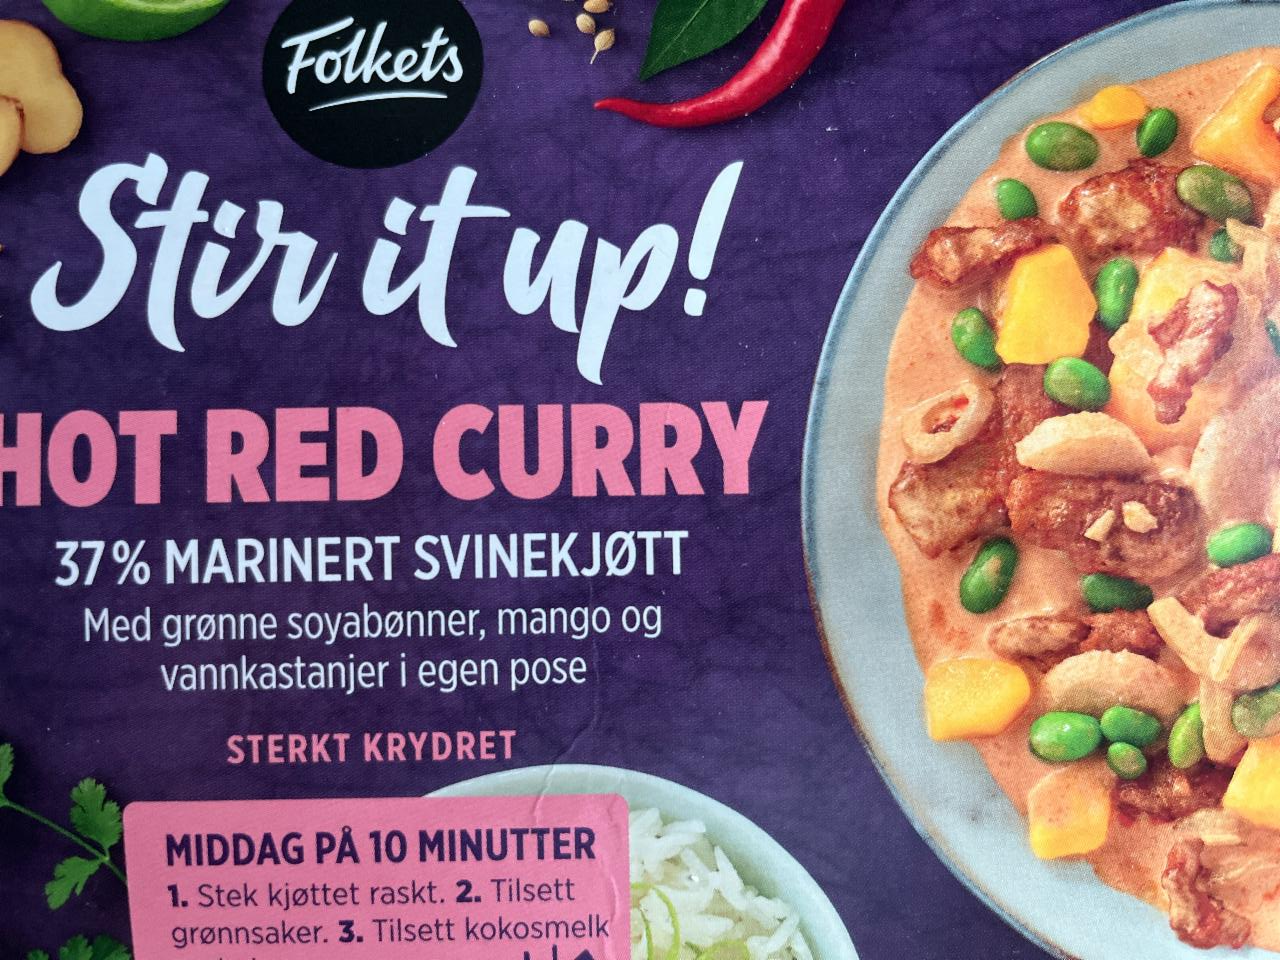 Фото - Hot red curry Folkets